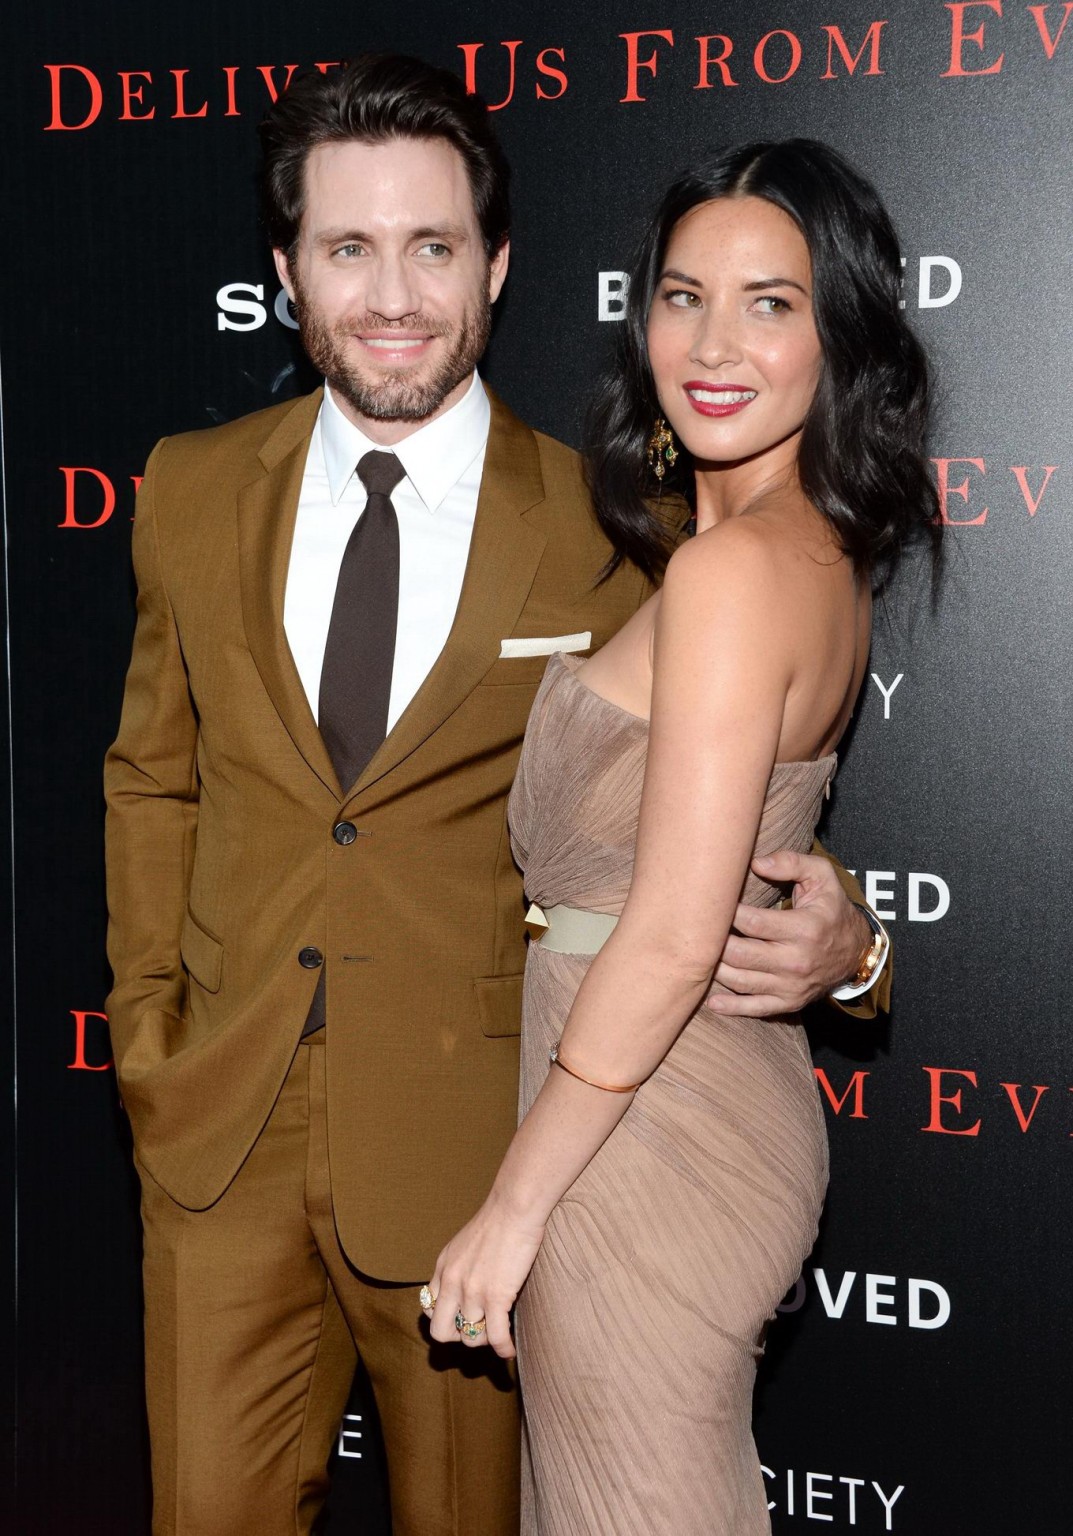 Olivia Munn busty wearing a strapless dress at Deliver Us From Evil screening in #75192922